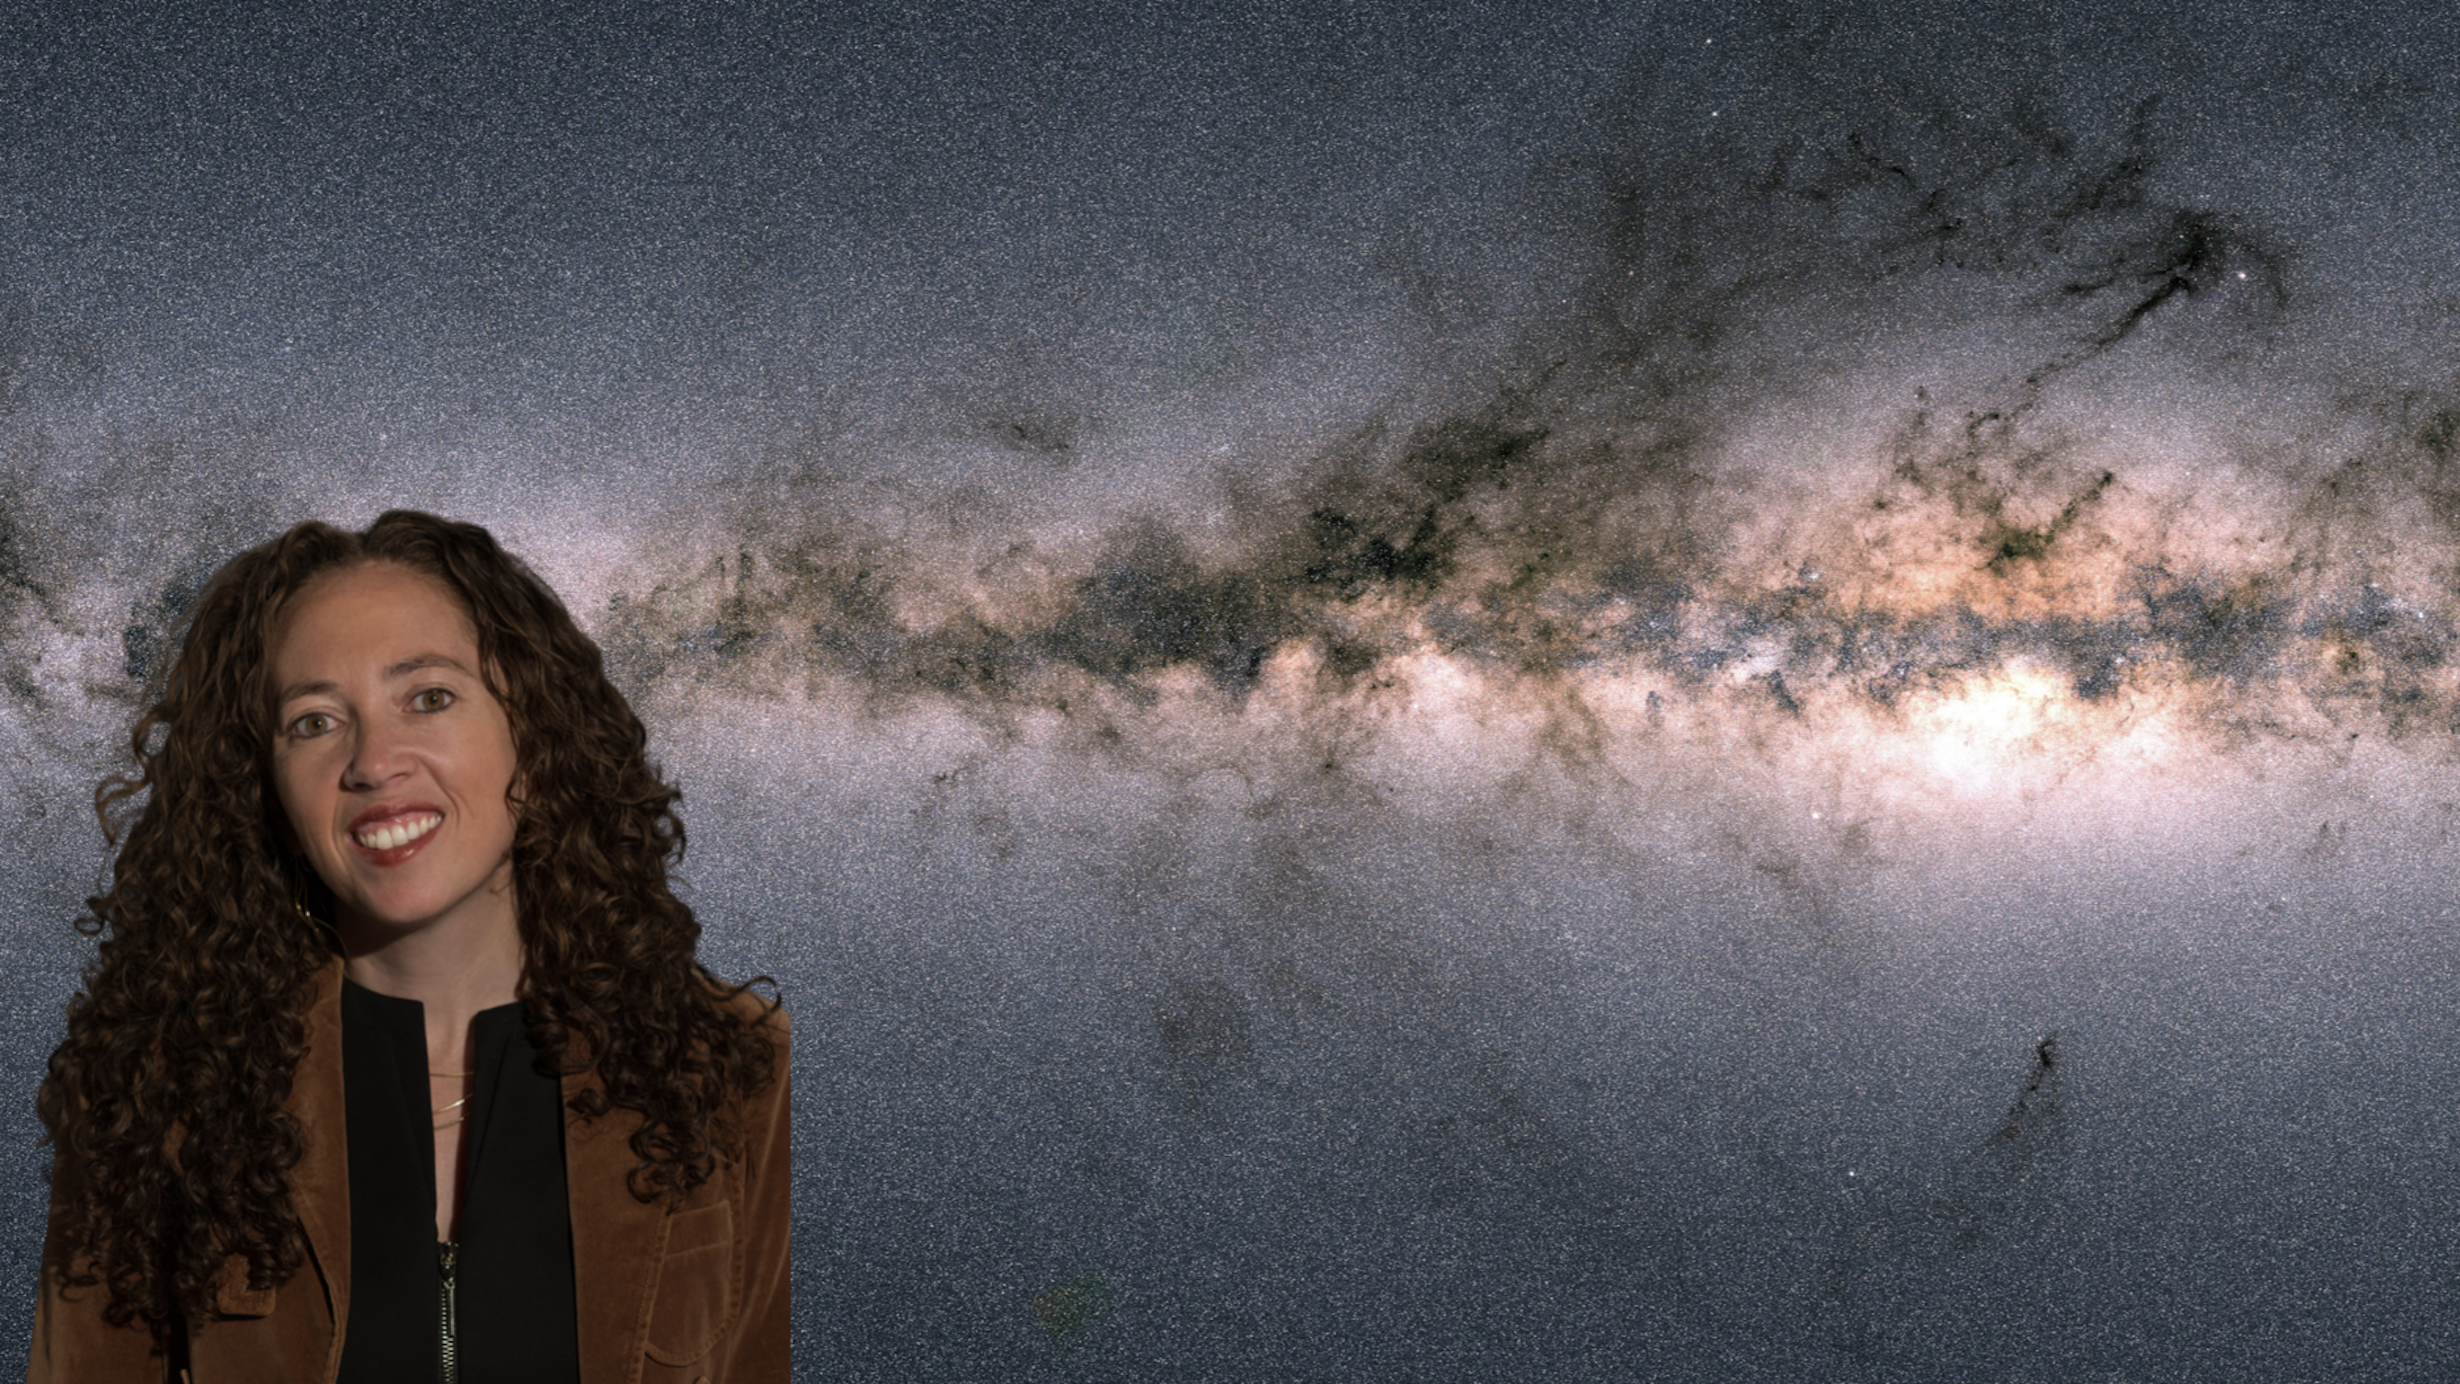 A woman with curly brown hair stands in front of an image of the Milky Way